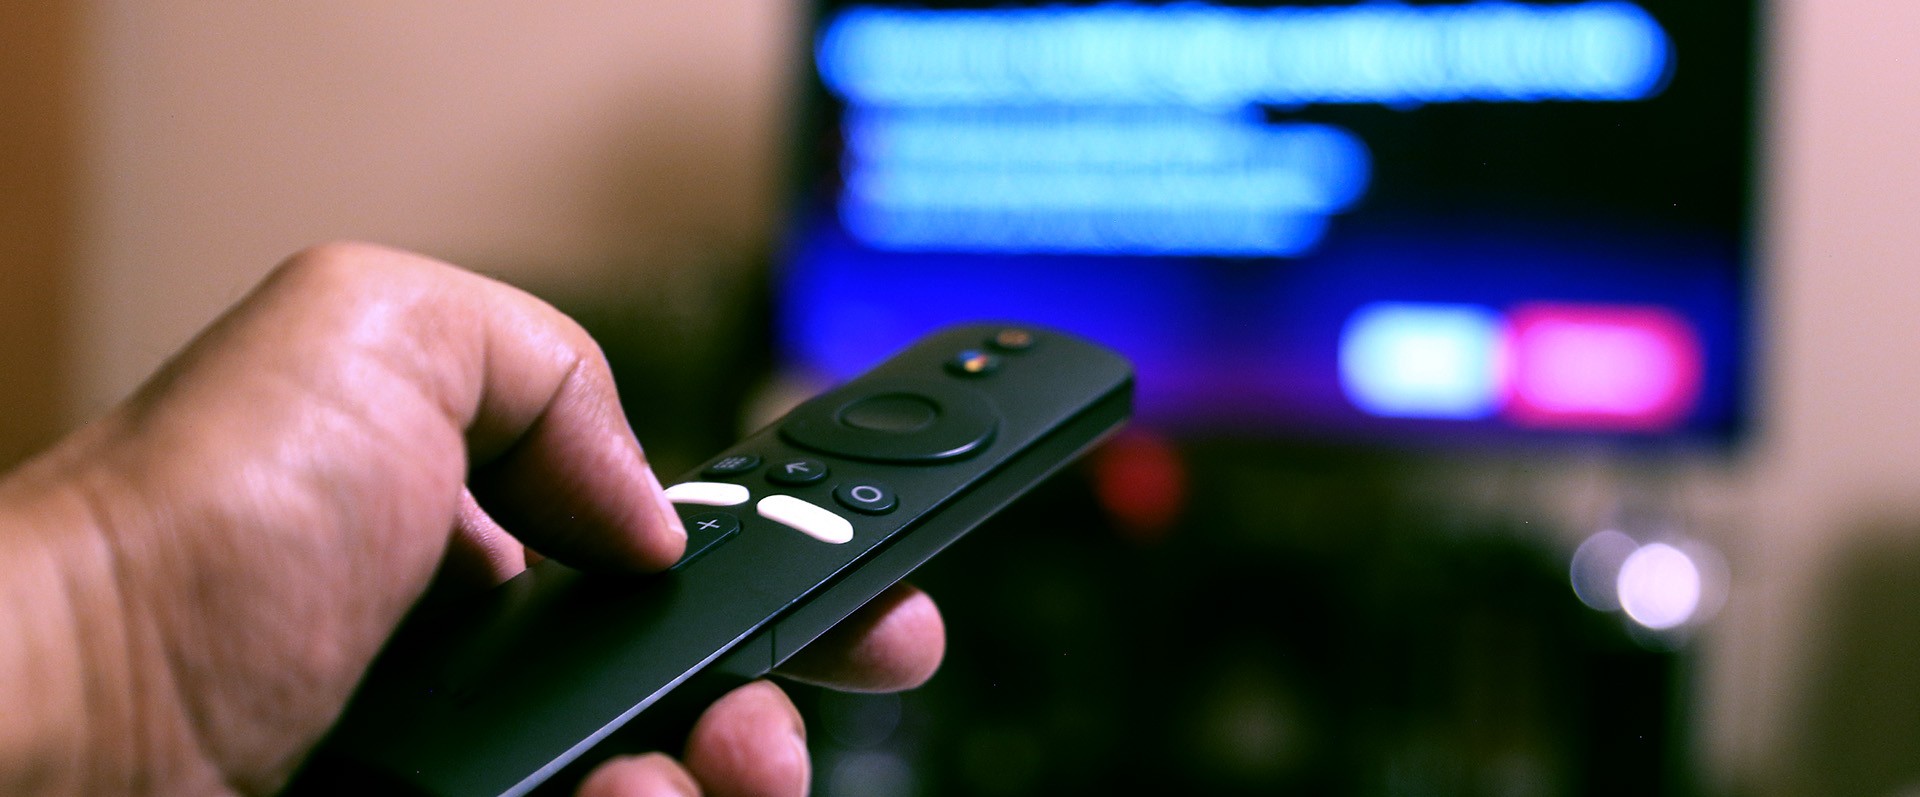 man's hand holding remote control with streaming tv in background